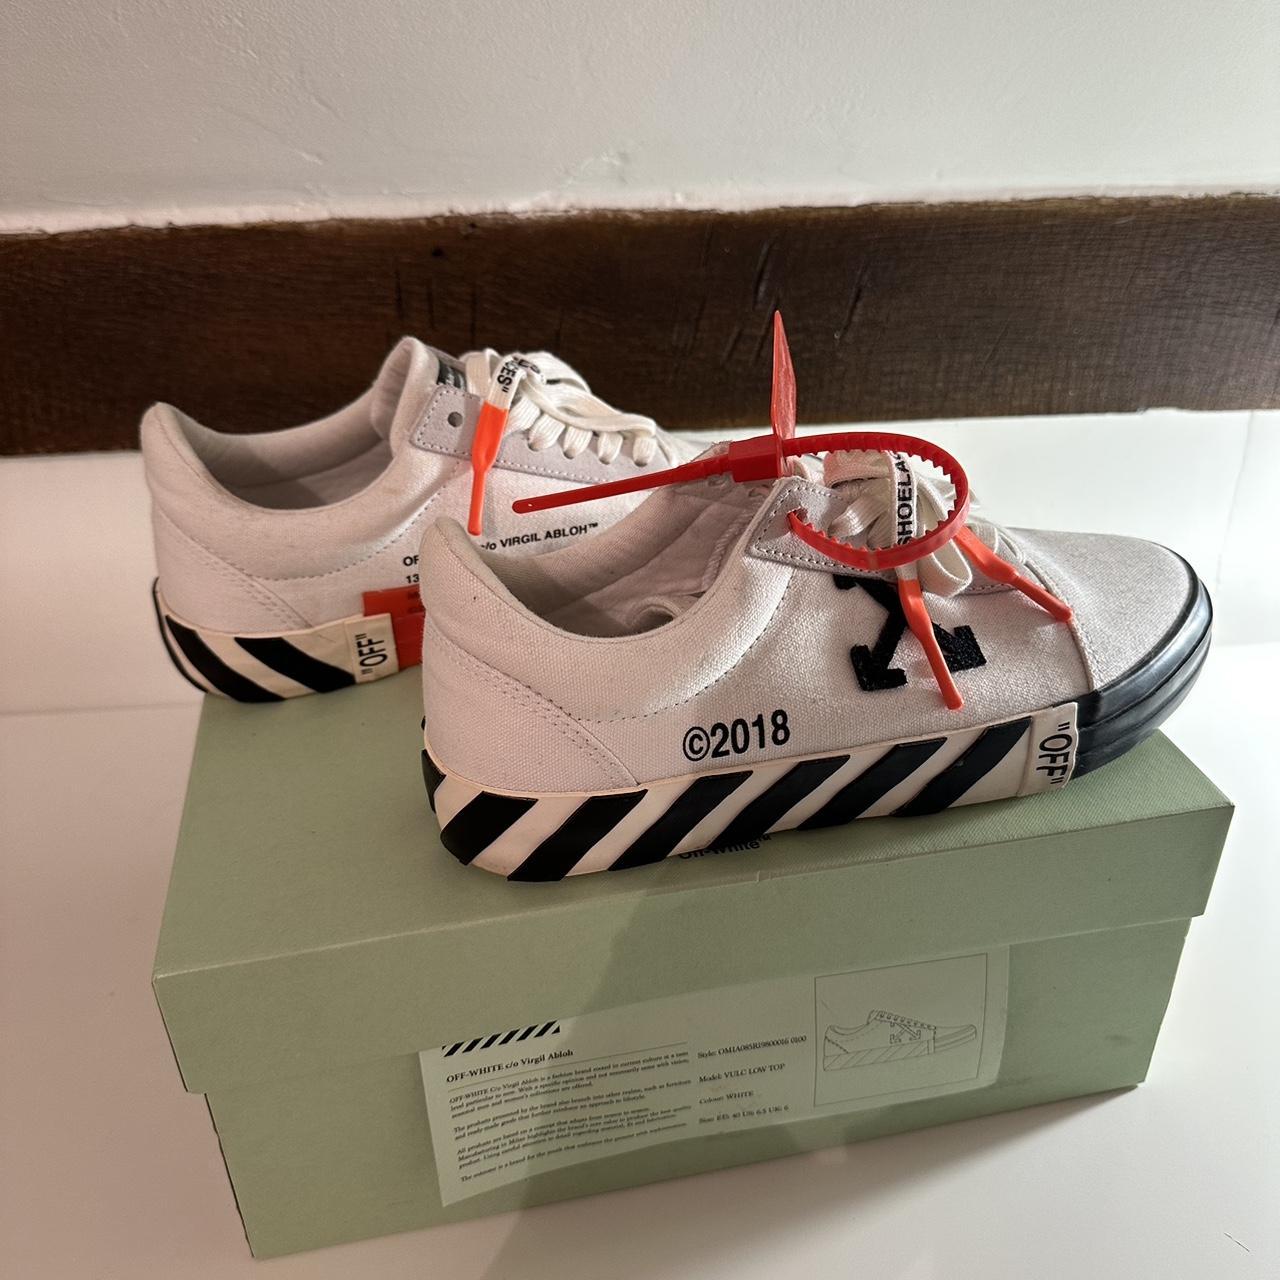 Off-White 2018 Shoes 100% Authentic Size 6 Condition... - Depop